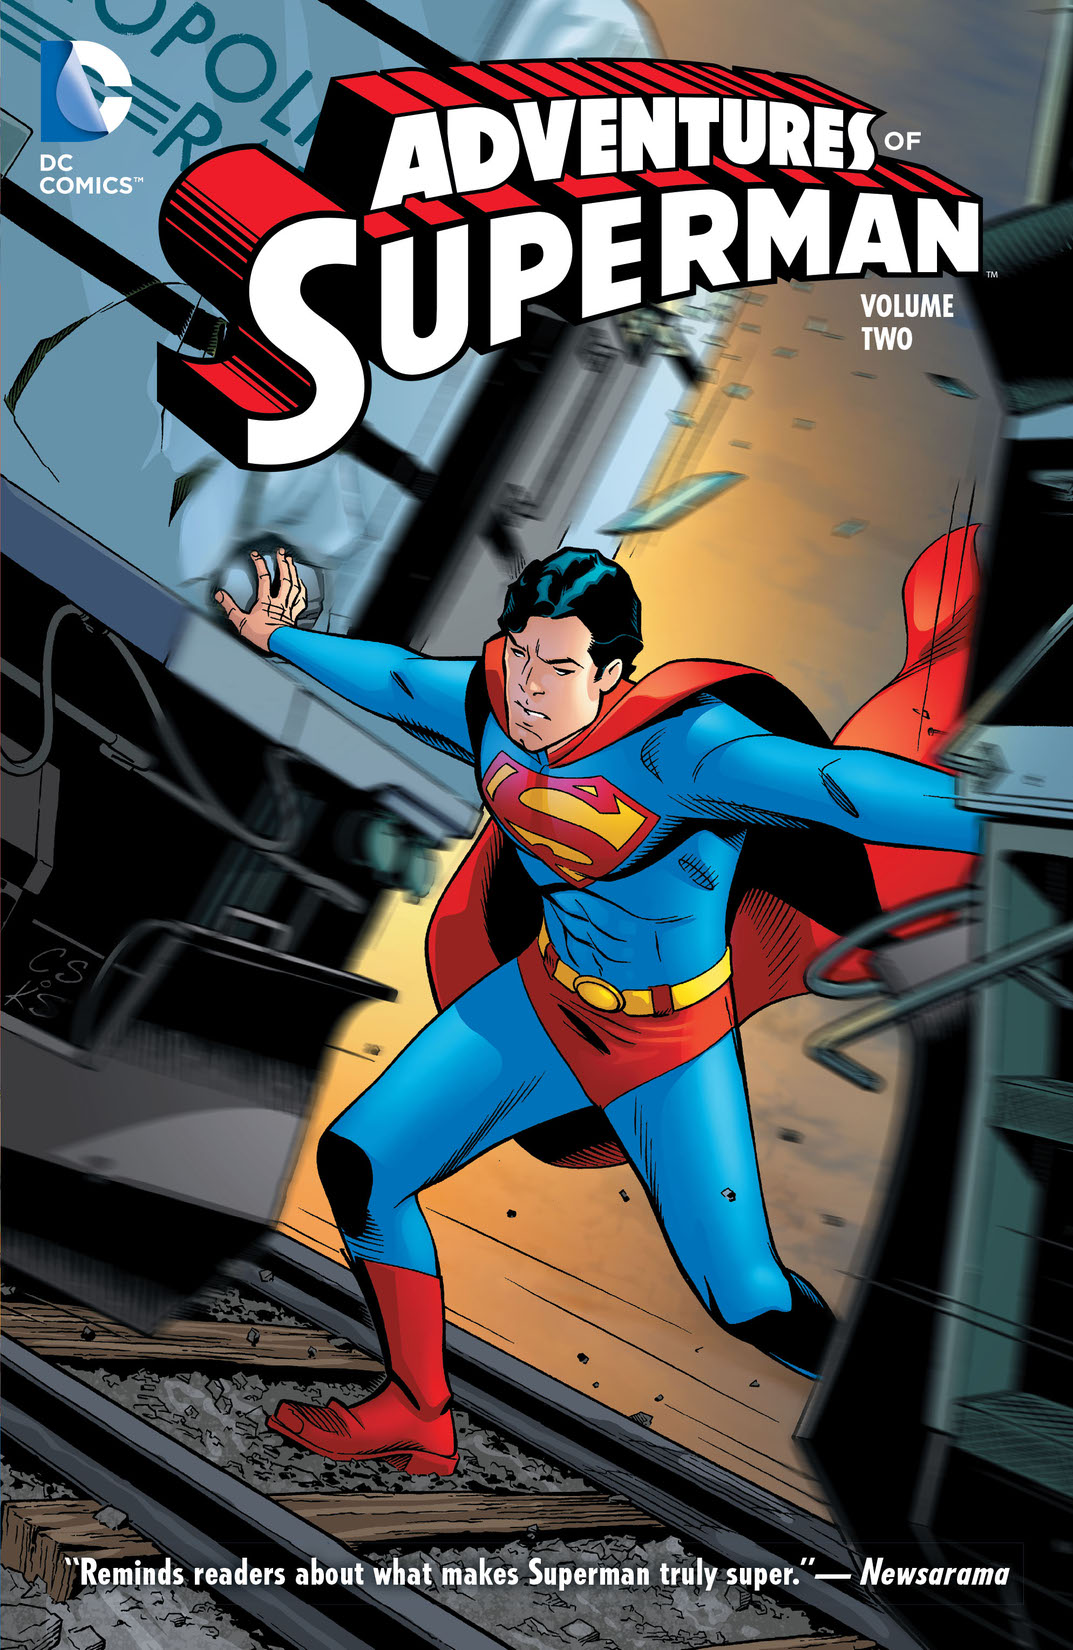 Adventures of Superman Vol. 2 preview images